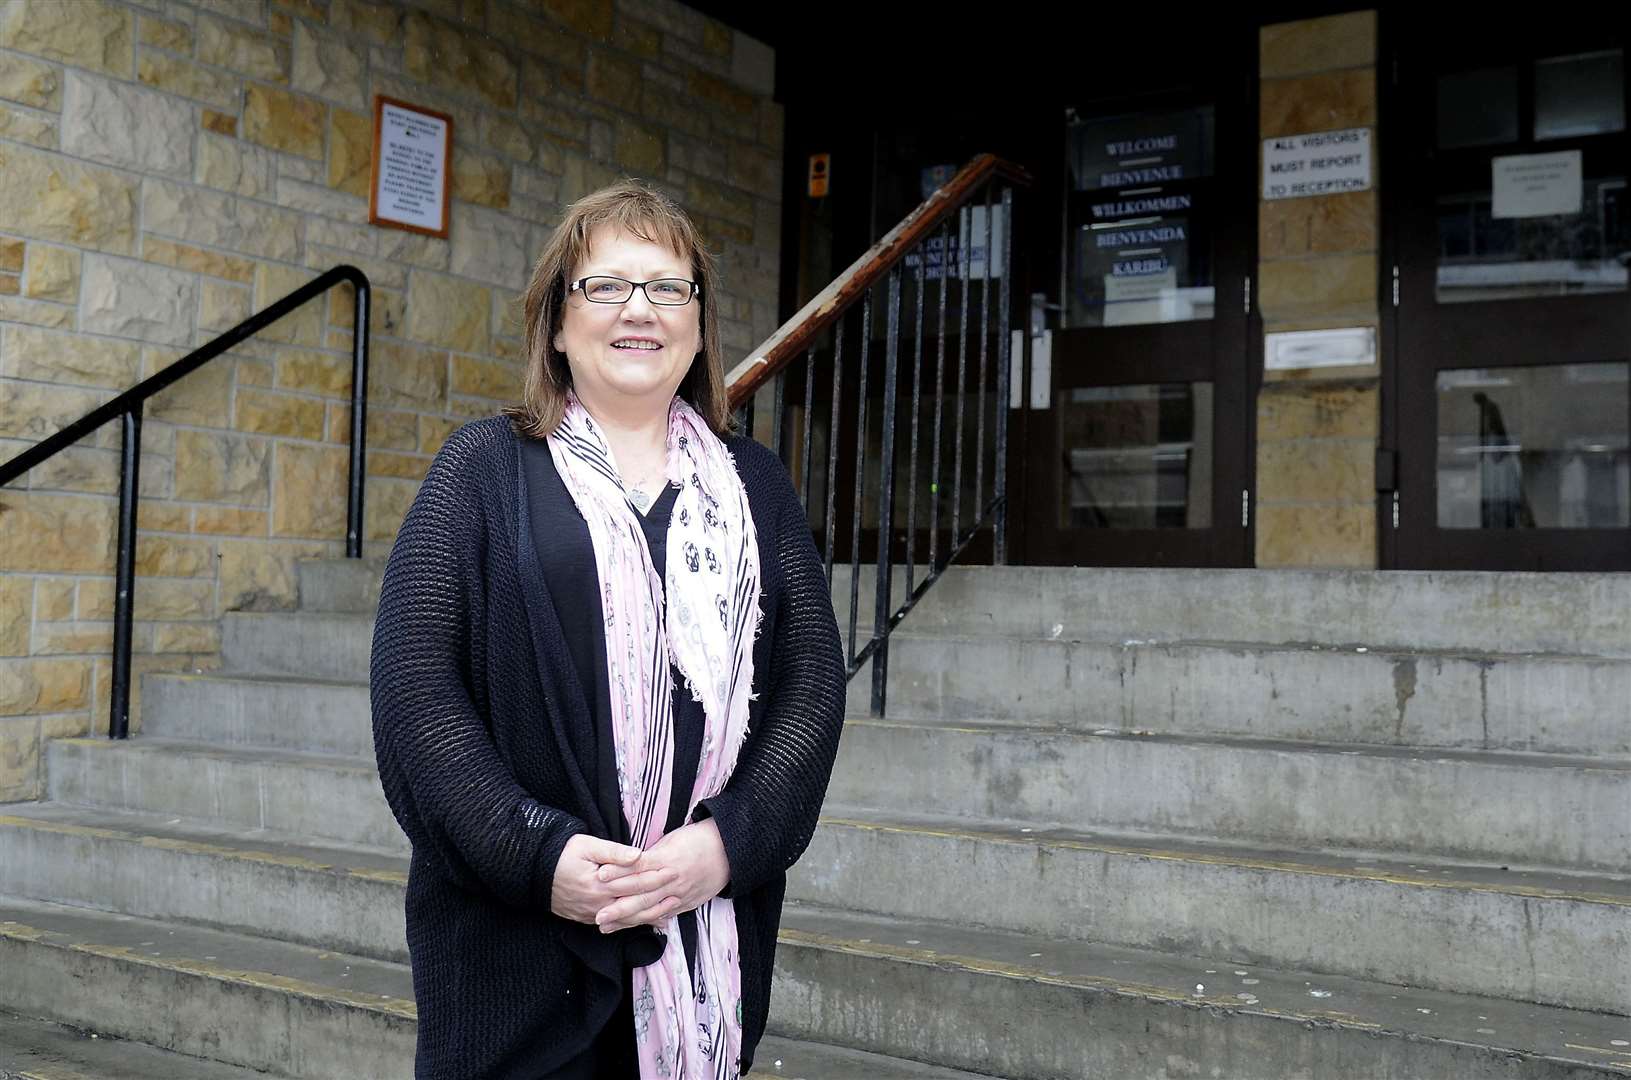 Councillor Sonya Warren has welcomed the change in rules the rules concerning presenting petitions to Moray Council.